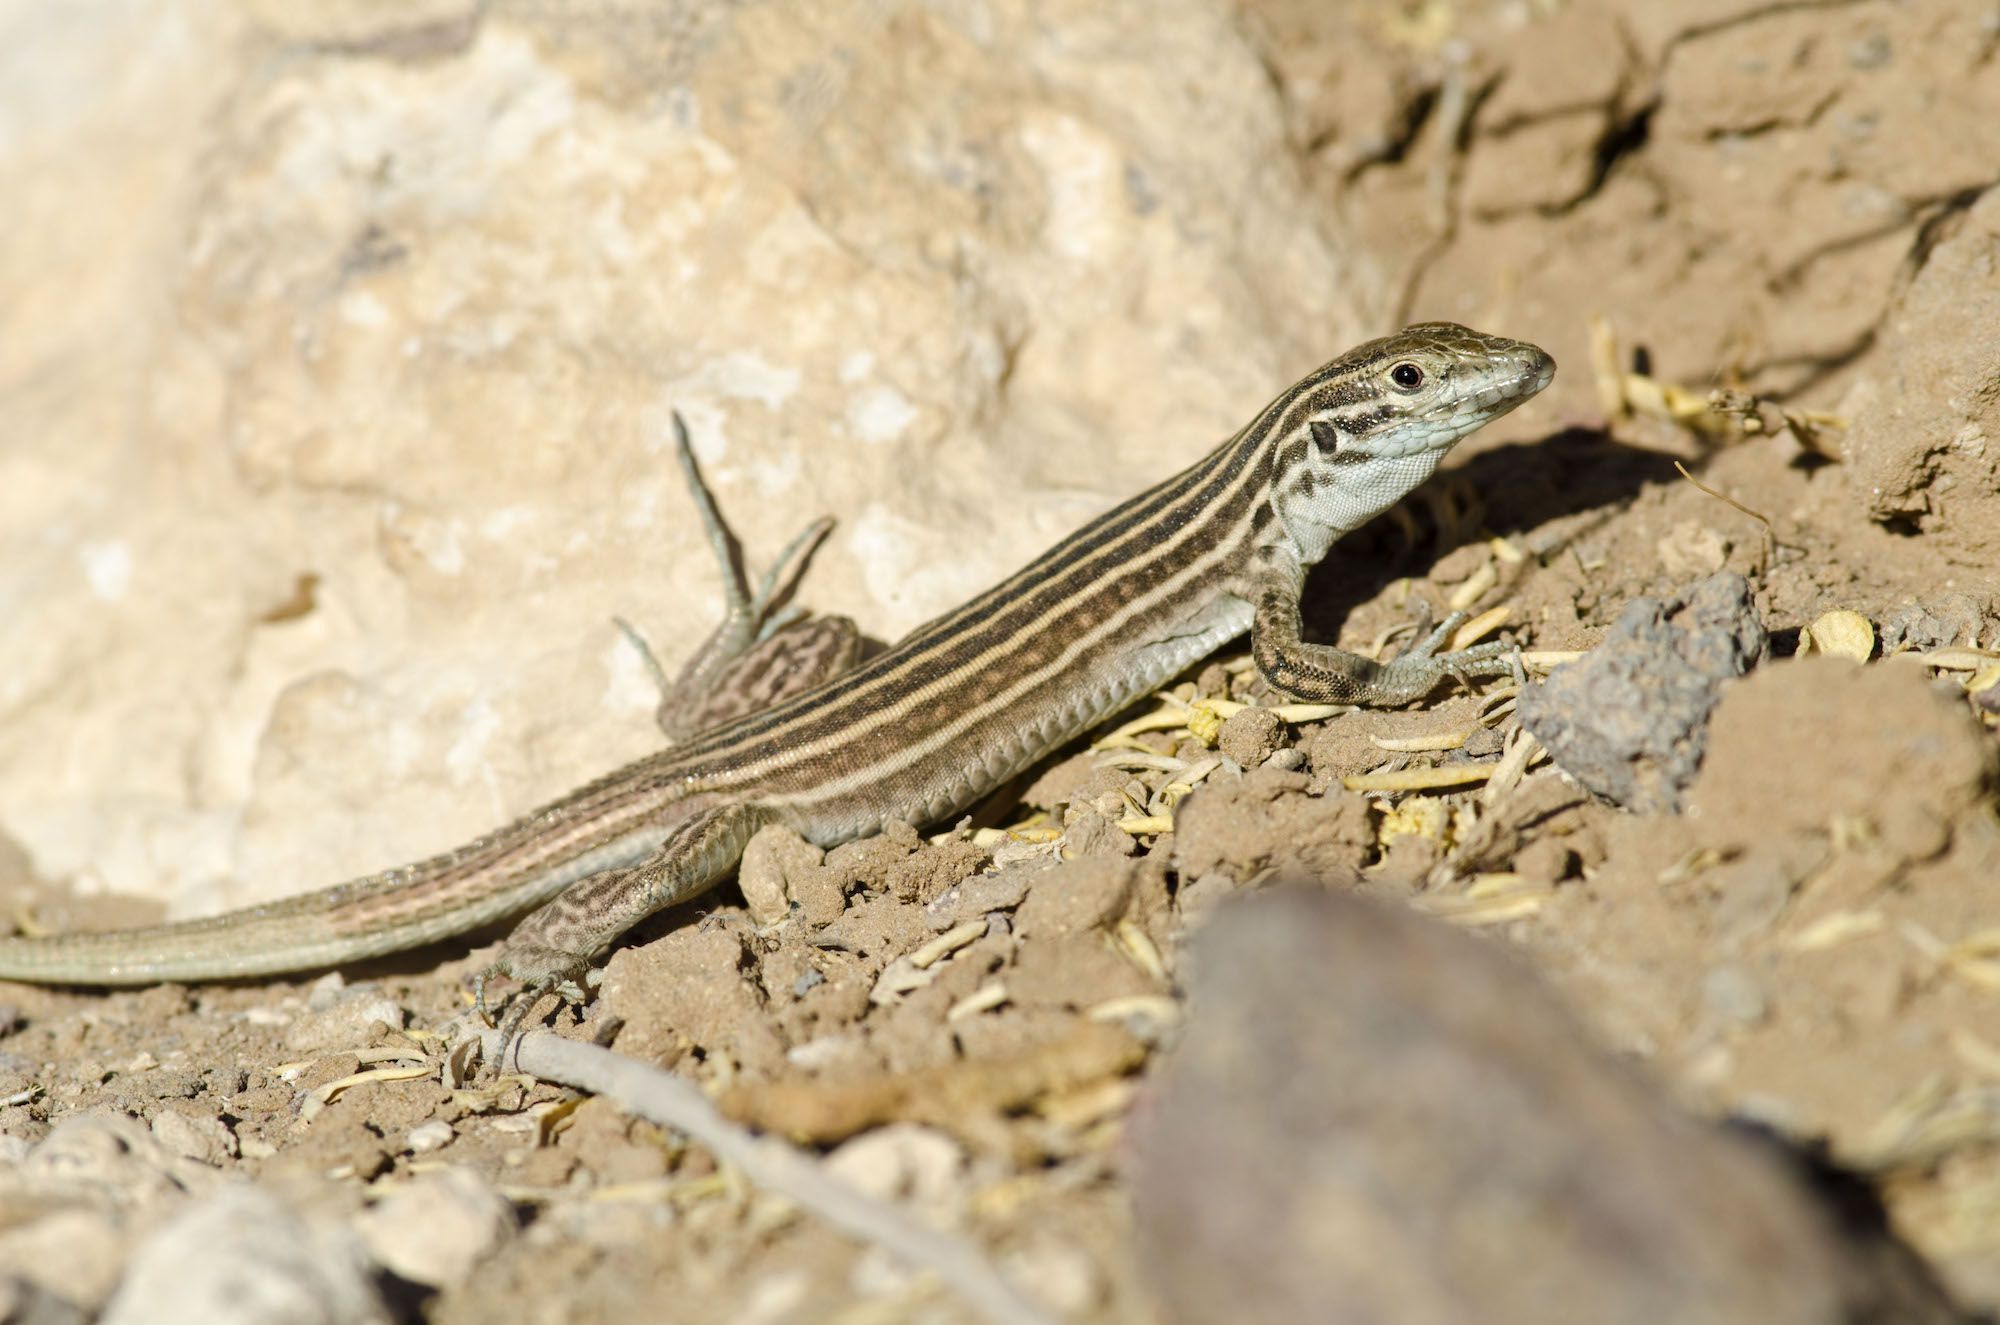 State reptile of New Mexico